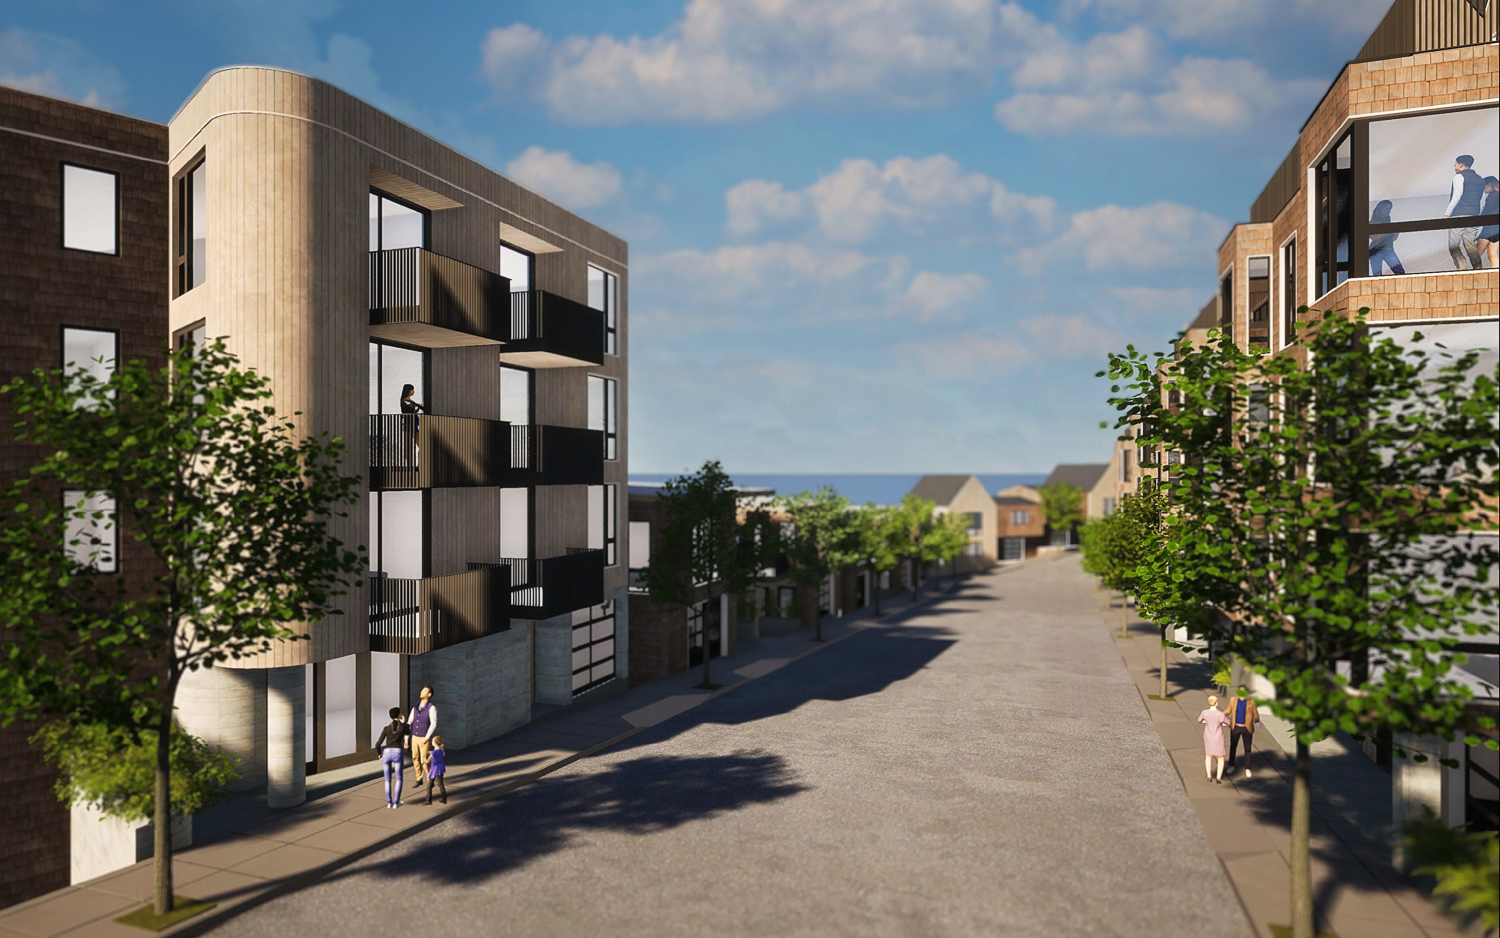 Midtown Land Homes educator housing and townhomes street view, rendering by RG Architecture